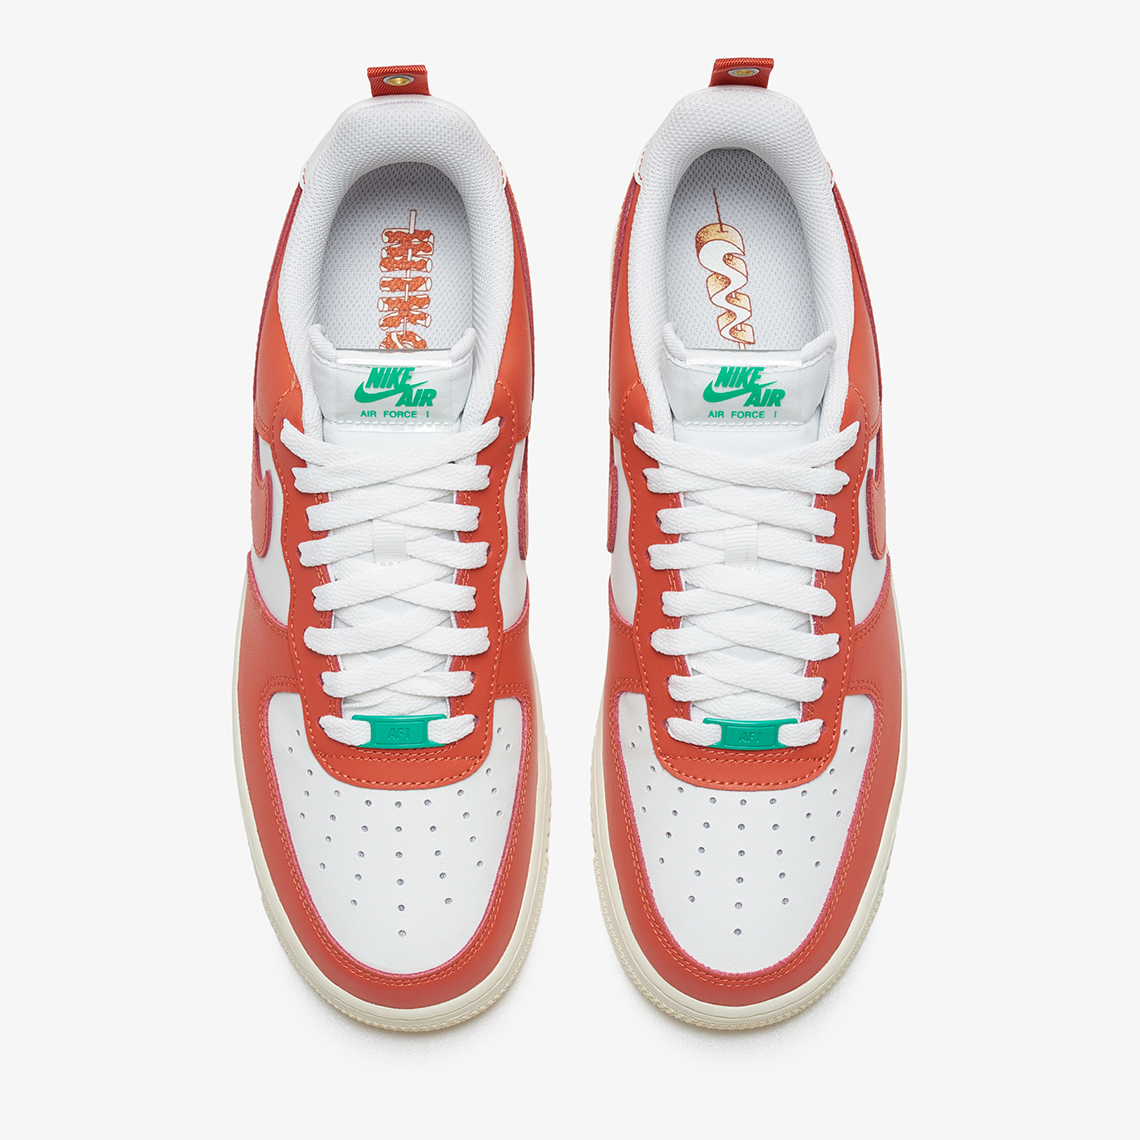 Nike joins the upcoming SB Dunk Fruity Pack that will be releasing during Spring 2022 Pojangmacha Snkrs Korea Dx3141 861 4